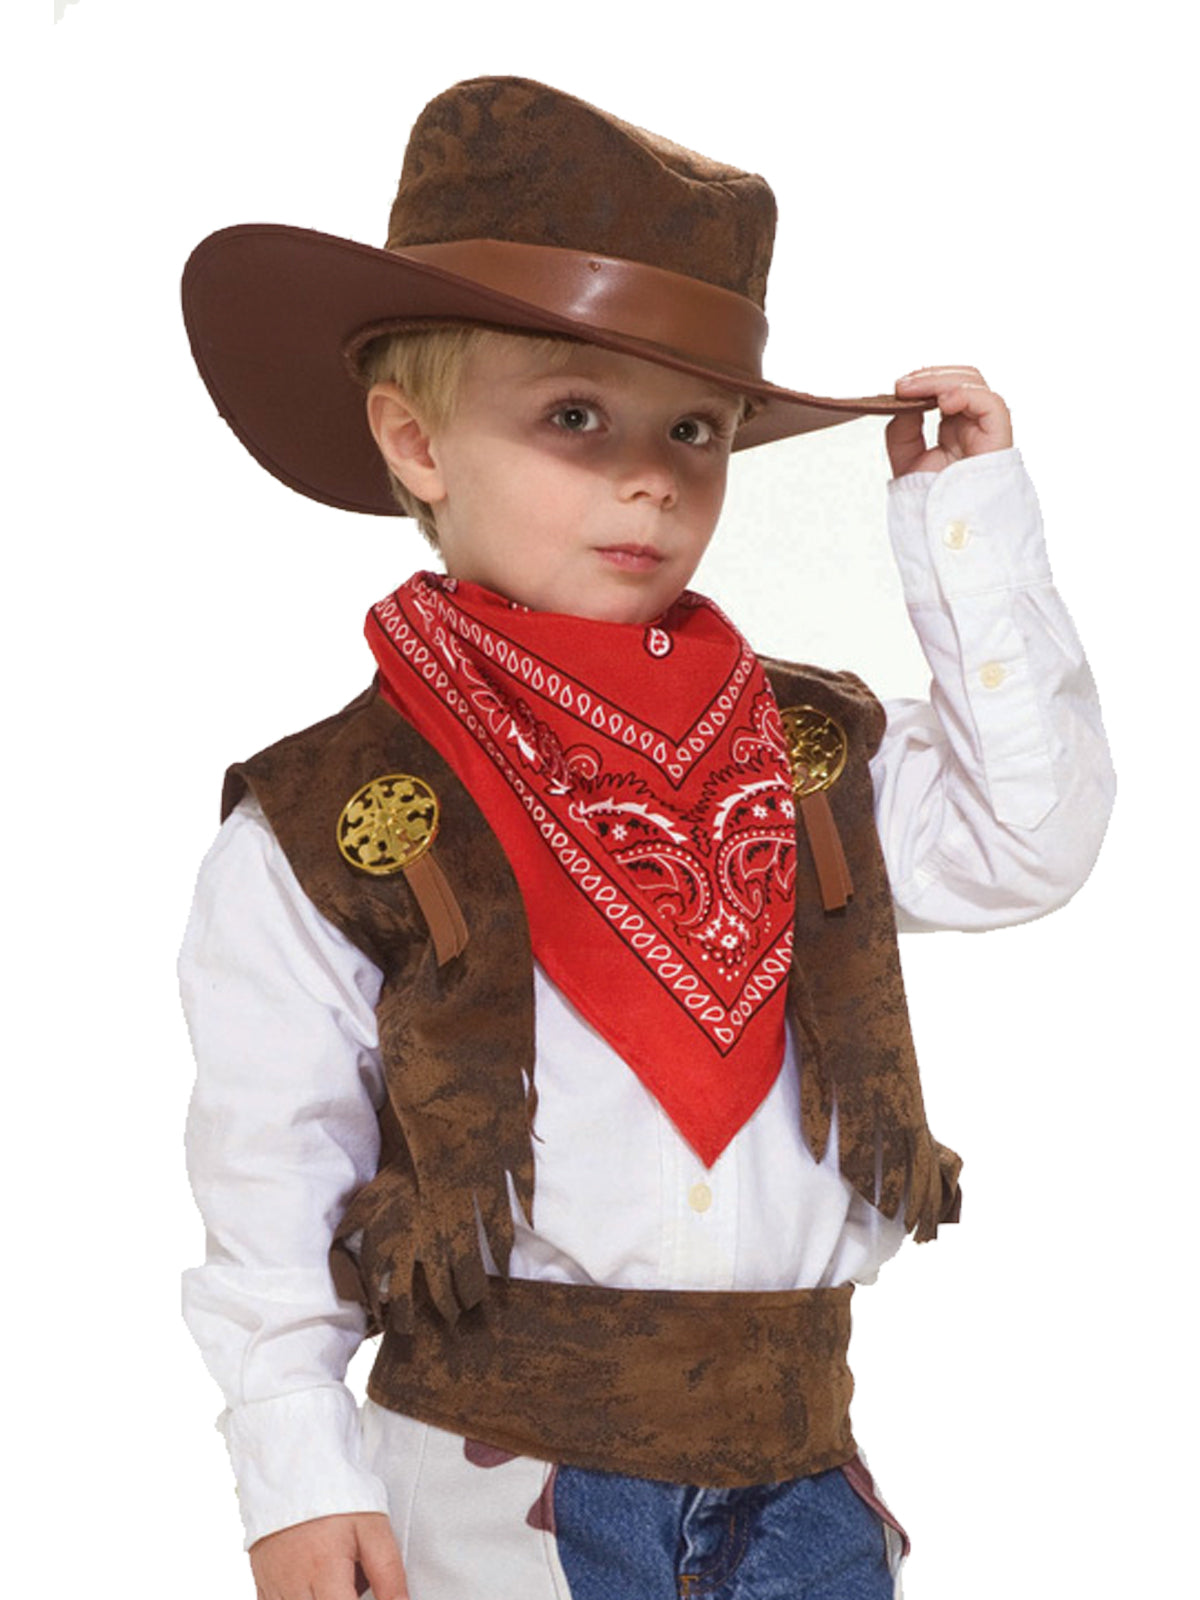 Cowboy Costume for Kids